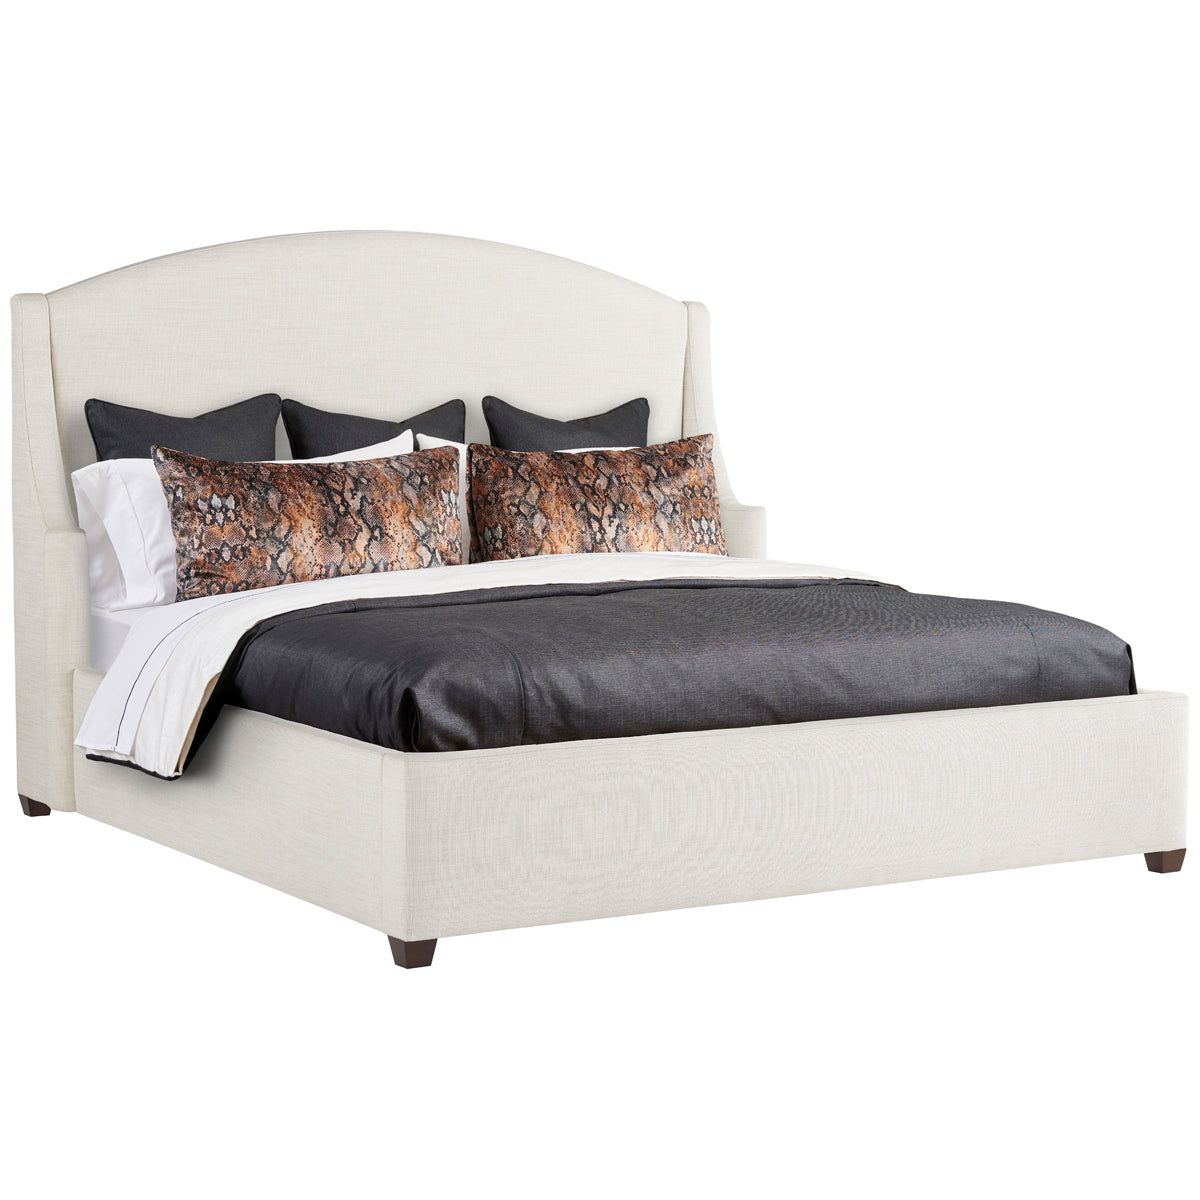 Lillian August Adele Bed